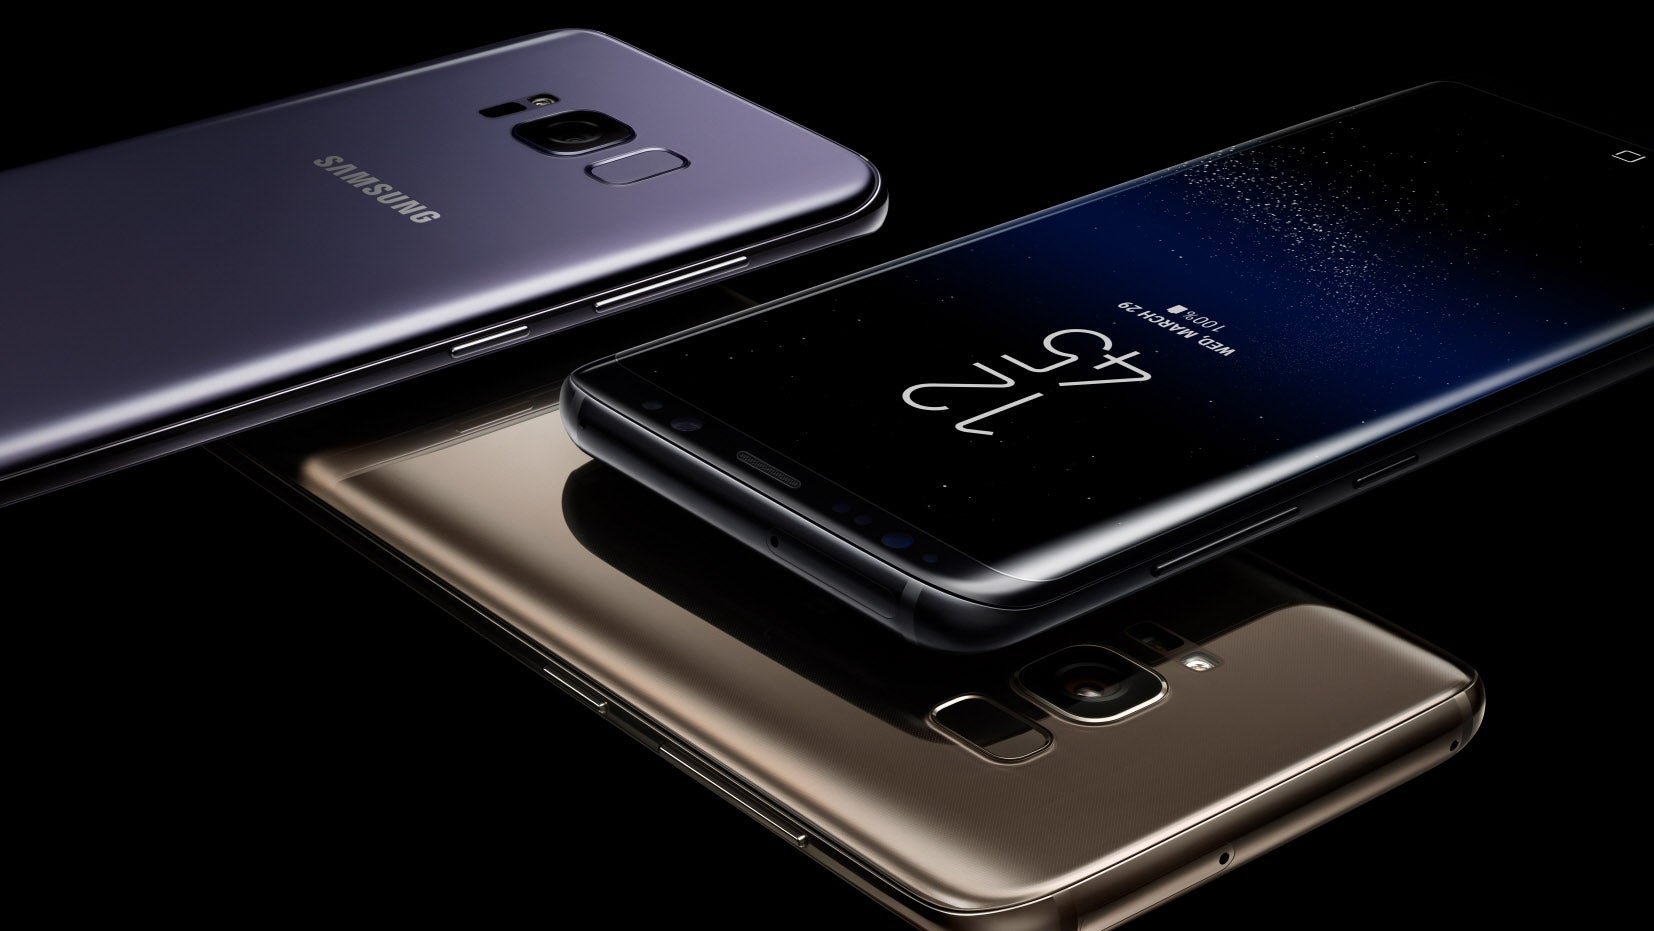 The Samsung Galaxy S8 and S8+ are now official: the biggest and most beautiful Galaxy flagships so far